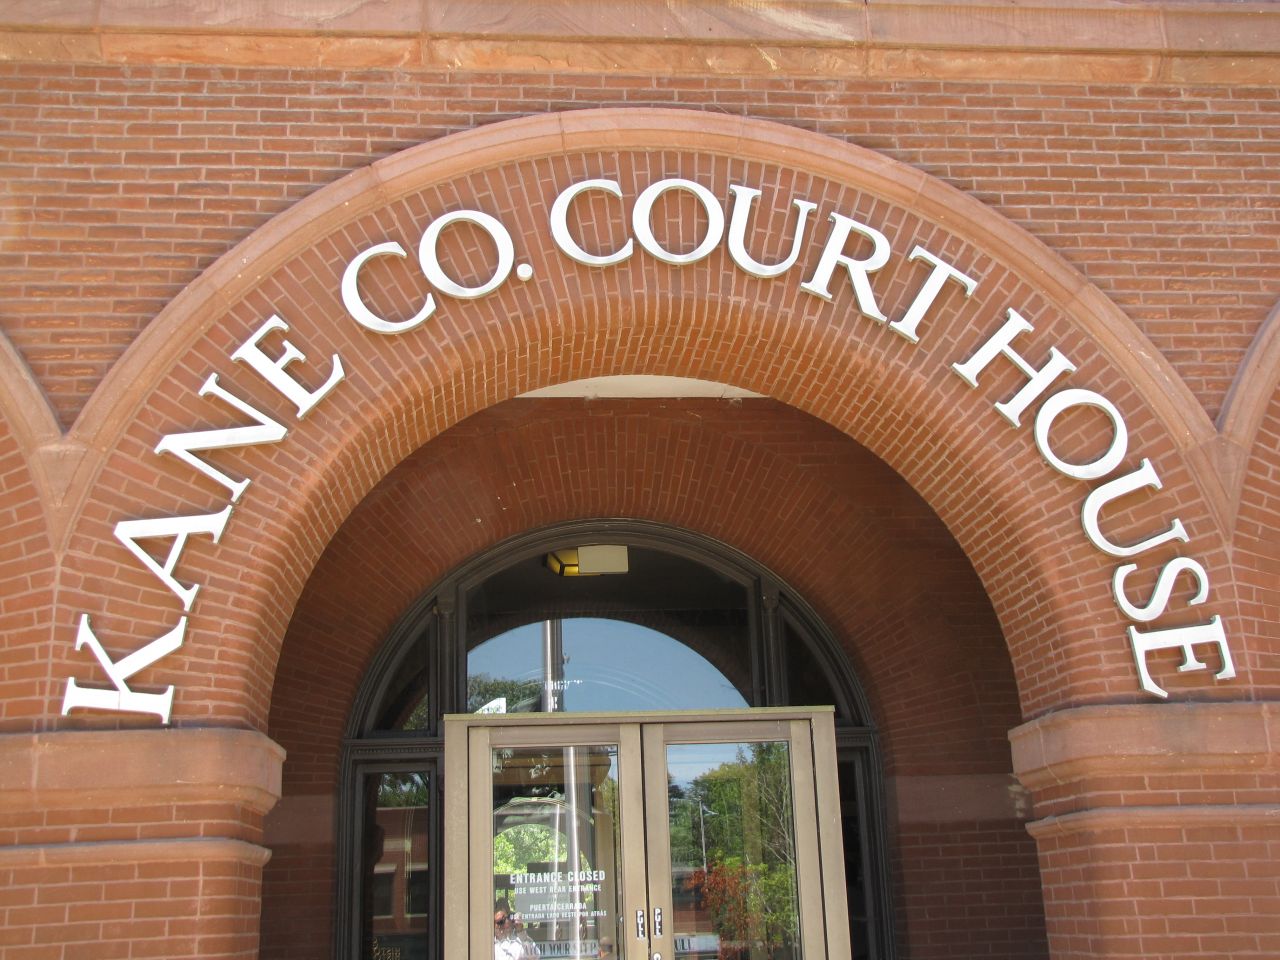 Courthouse front door - but entrance is at rear of building